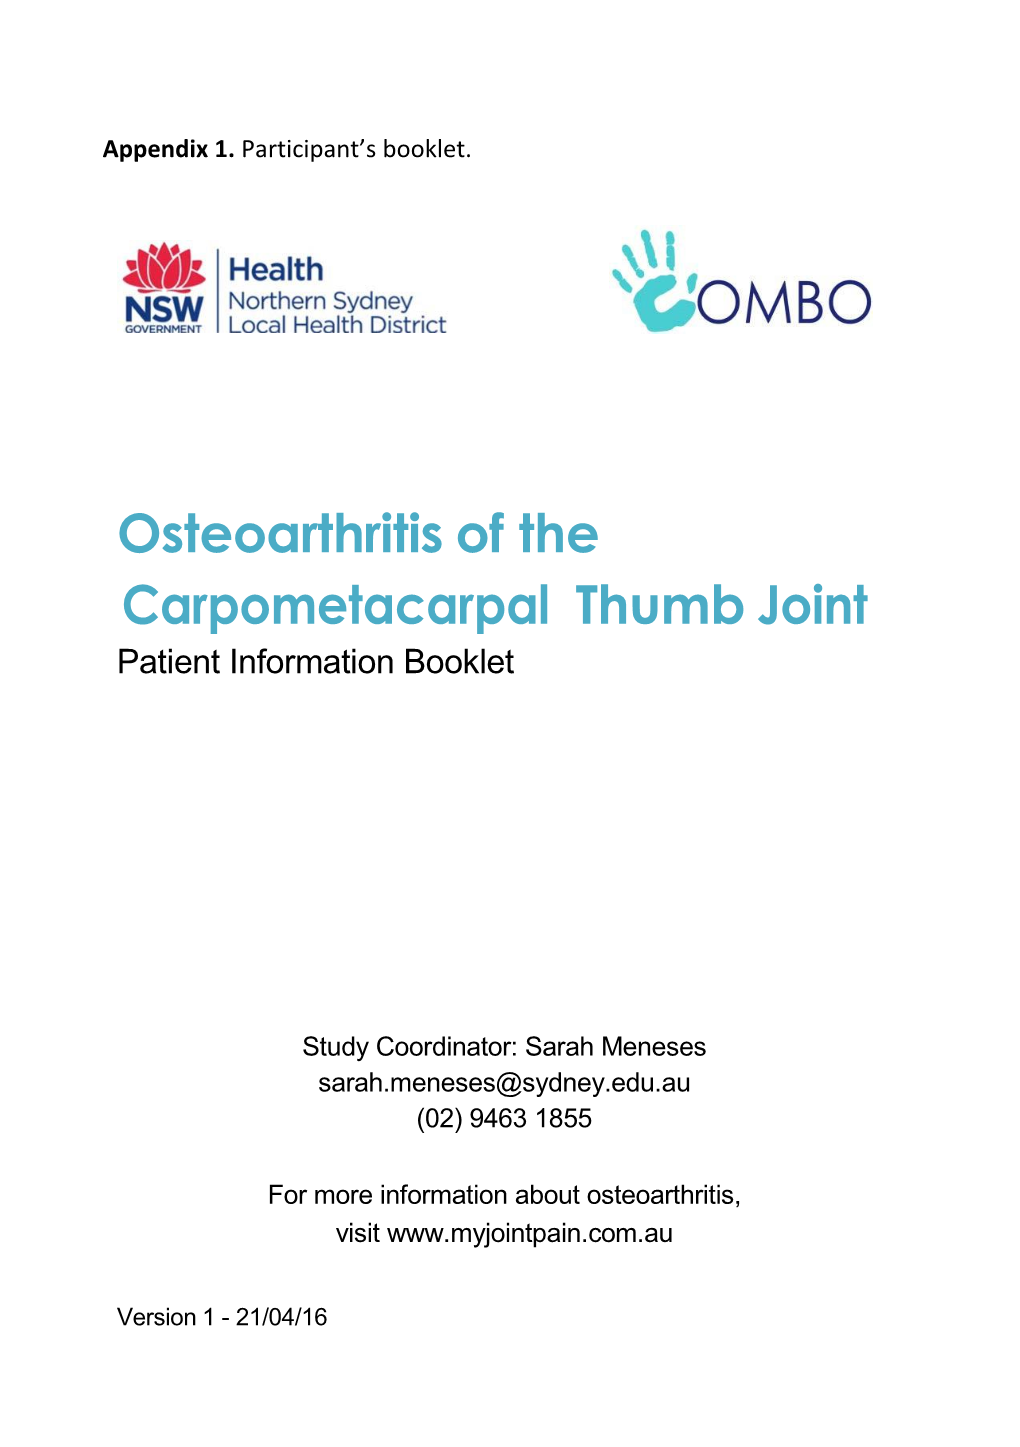 Osteoarthritis of the Carpometacarpal Thumb Joint Patient Information Booklet